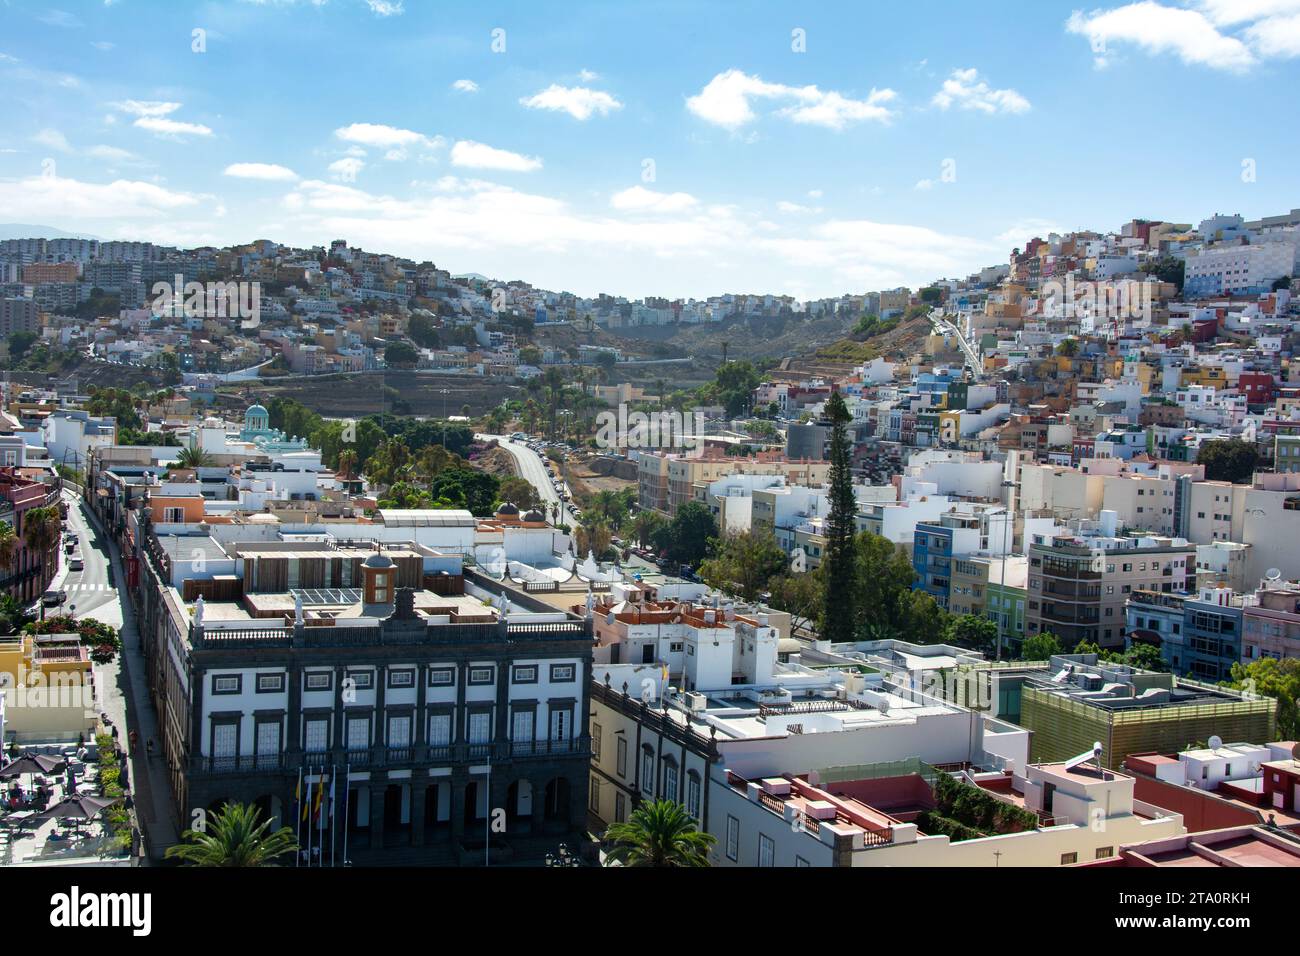 Panoramic top view of the capital Las Palmas Gran Canaria in Spain with blue sky Stock Photo